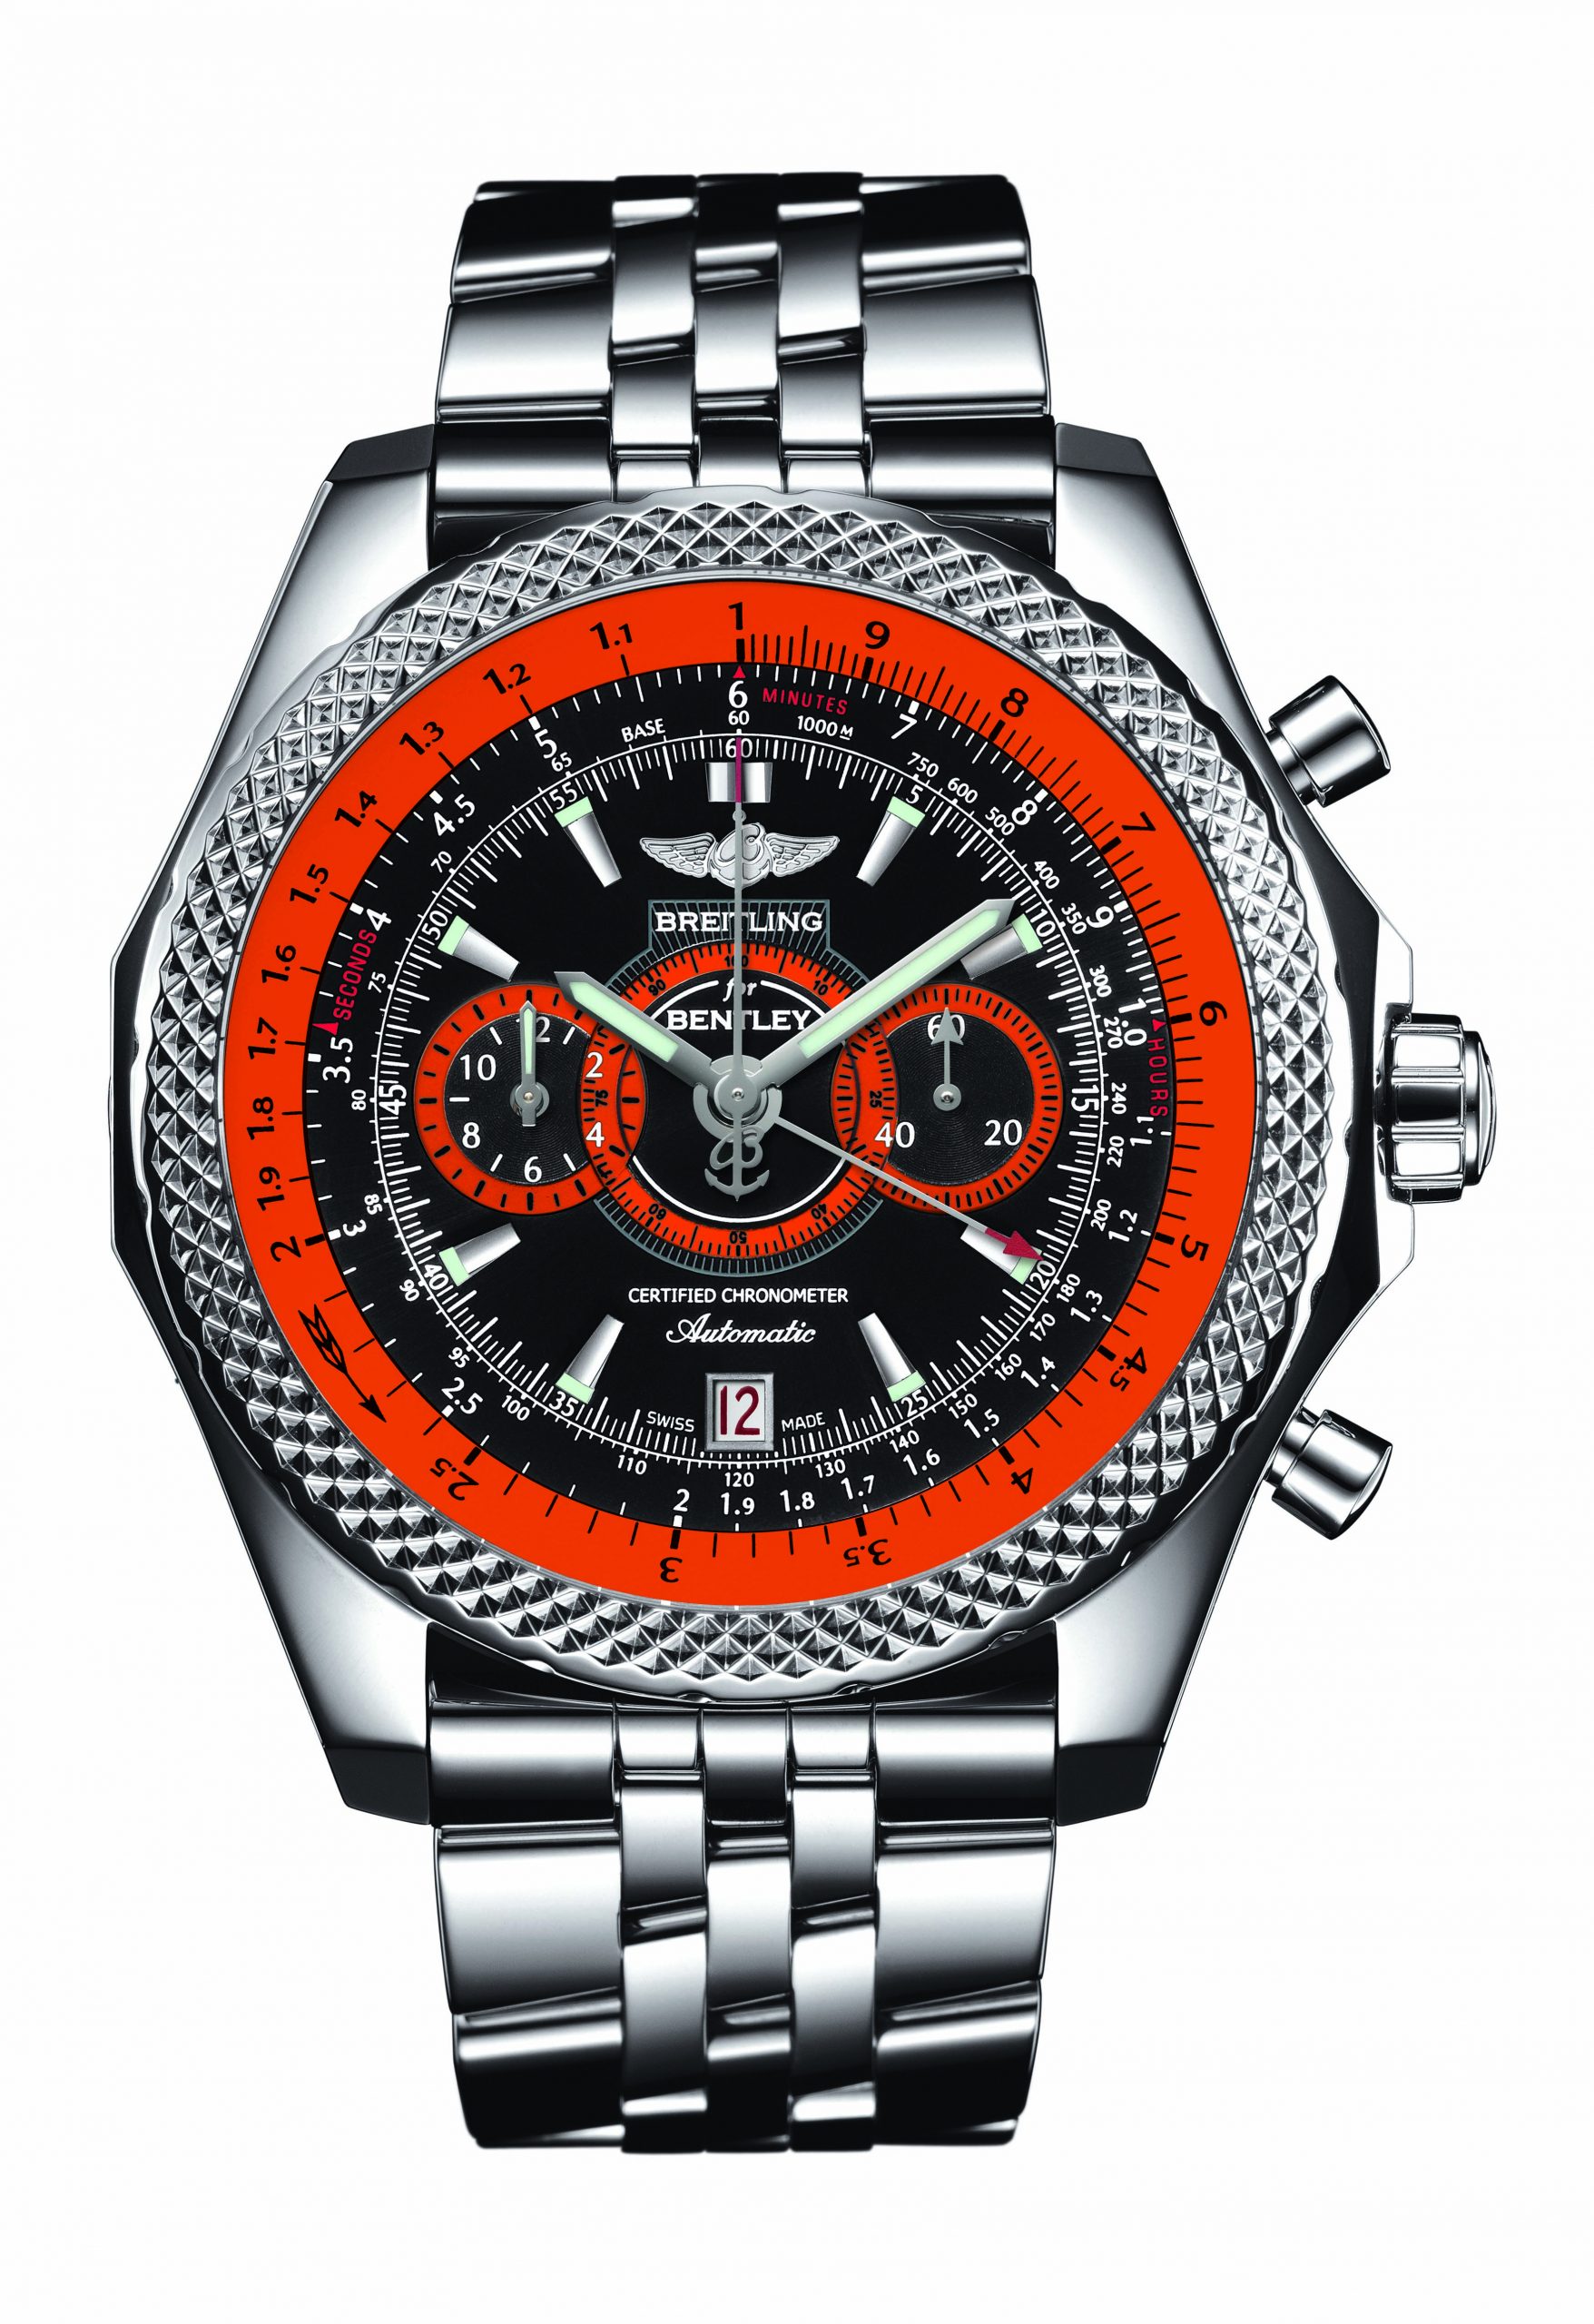 Best Auto-Related Watches of 2013